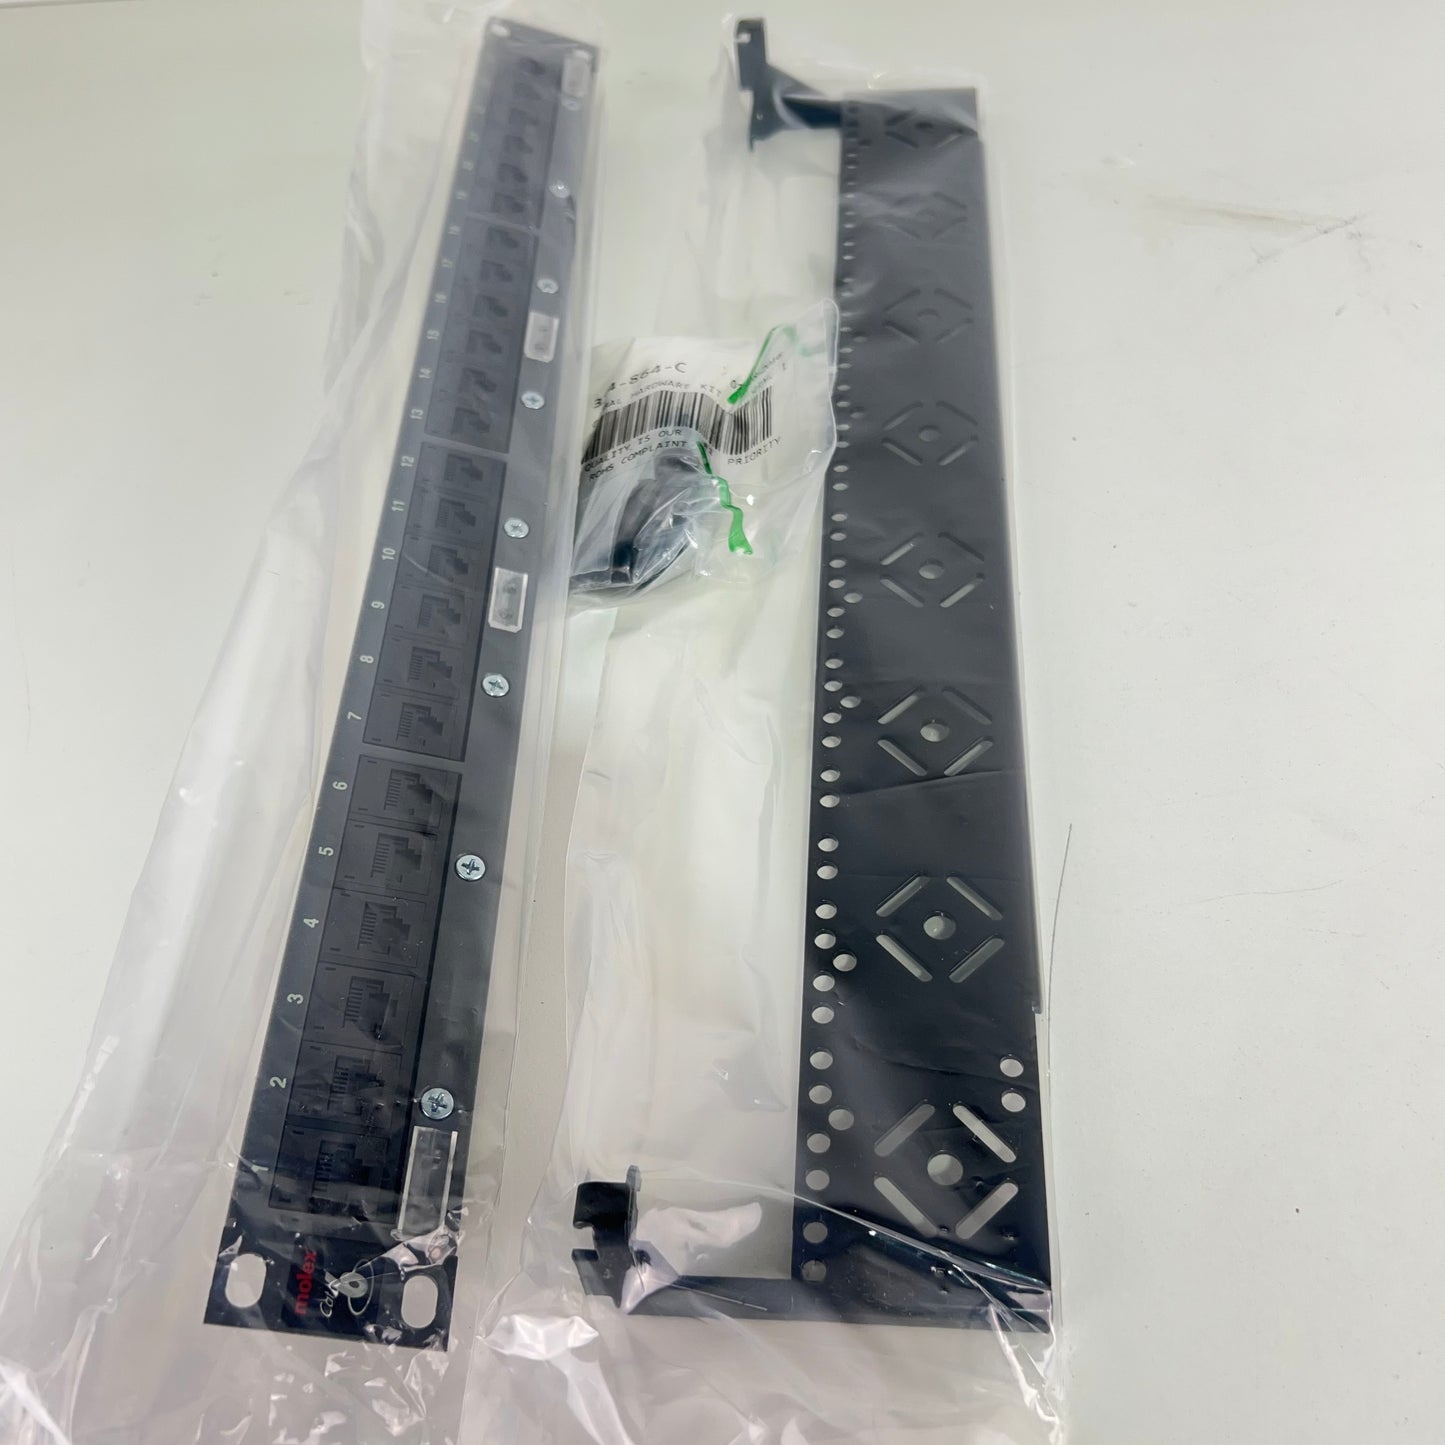 Molex Networking Patch Panel 24 Port Cat 6 Brand New PN 00141-IN